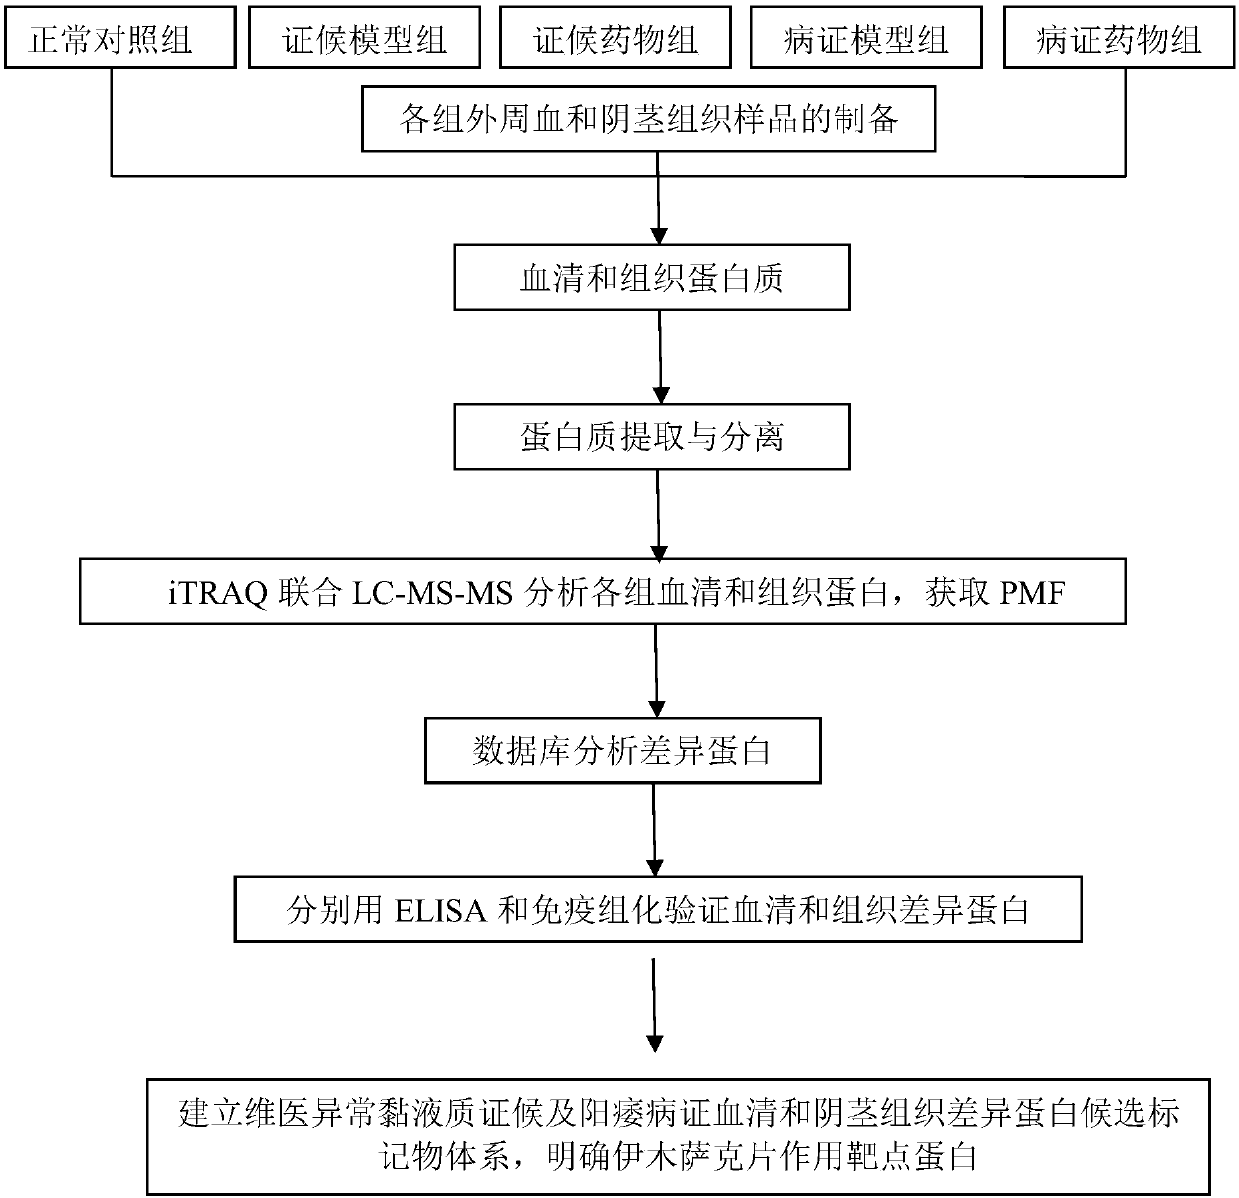 Target protein of Yimusake tablet acting on abnormal balham syndrome and erectile dysfunction syndrome models and screening method thereof